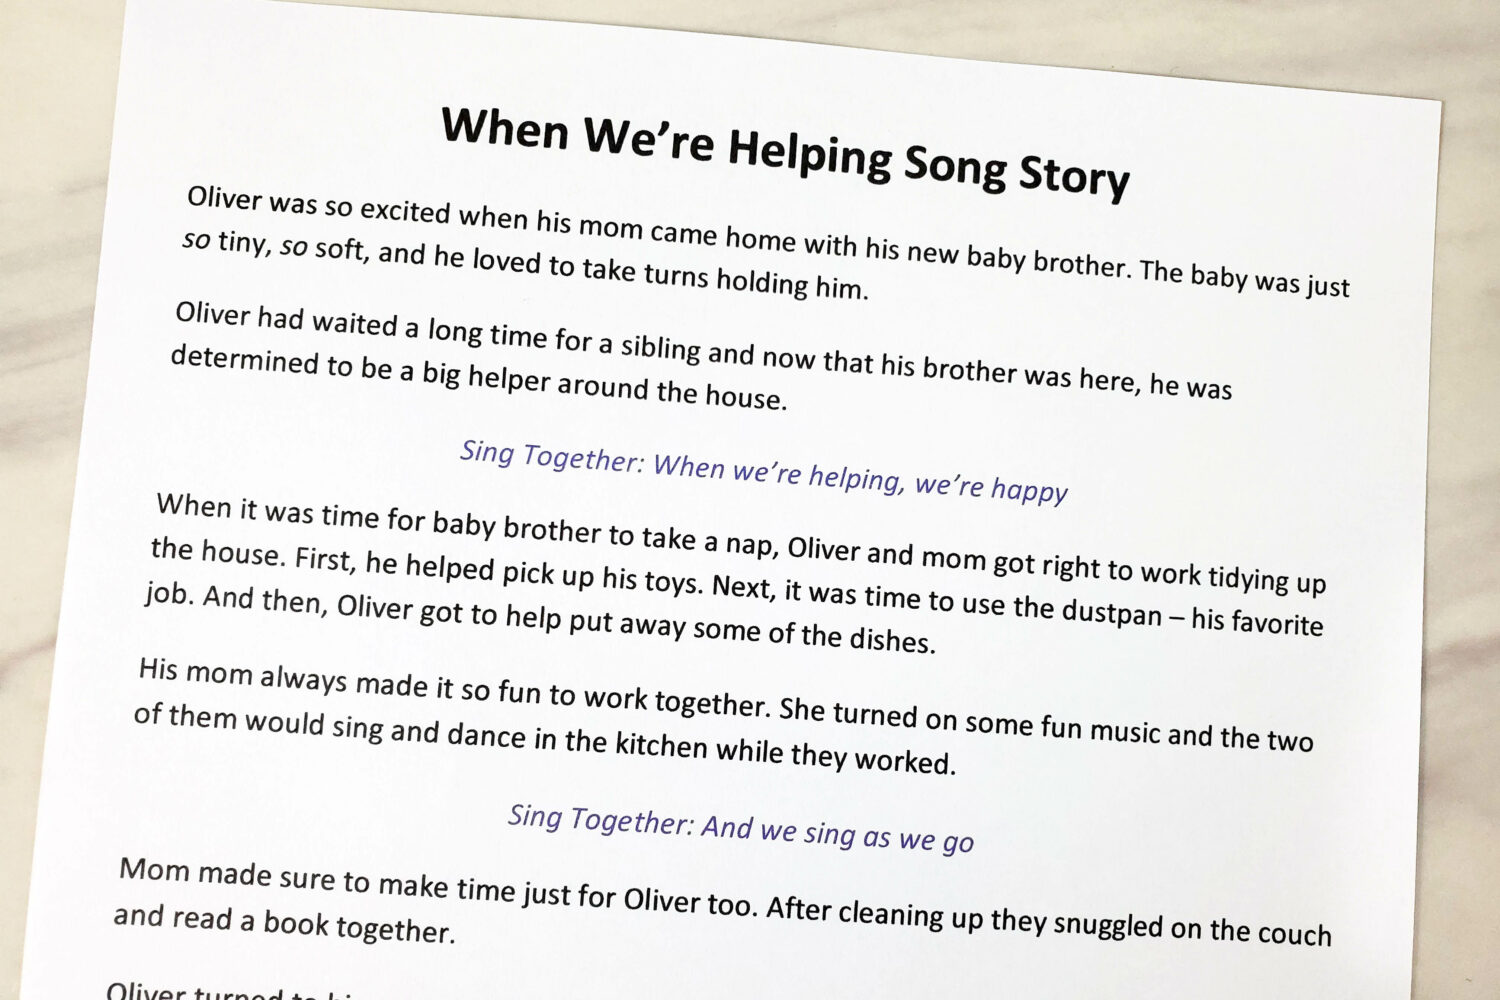 When We're Helping Song Story singing time activity! You'll love sharing this sweet story of Oliver and his new baby brother as he helps his mom with lines from the song woven in and fun additional ways to extend this activity. Includes printable song helps for LDS Primary music leaders.